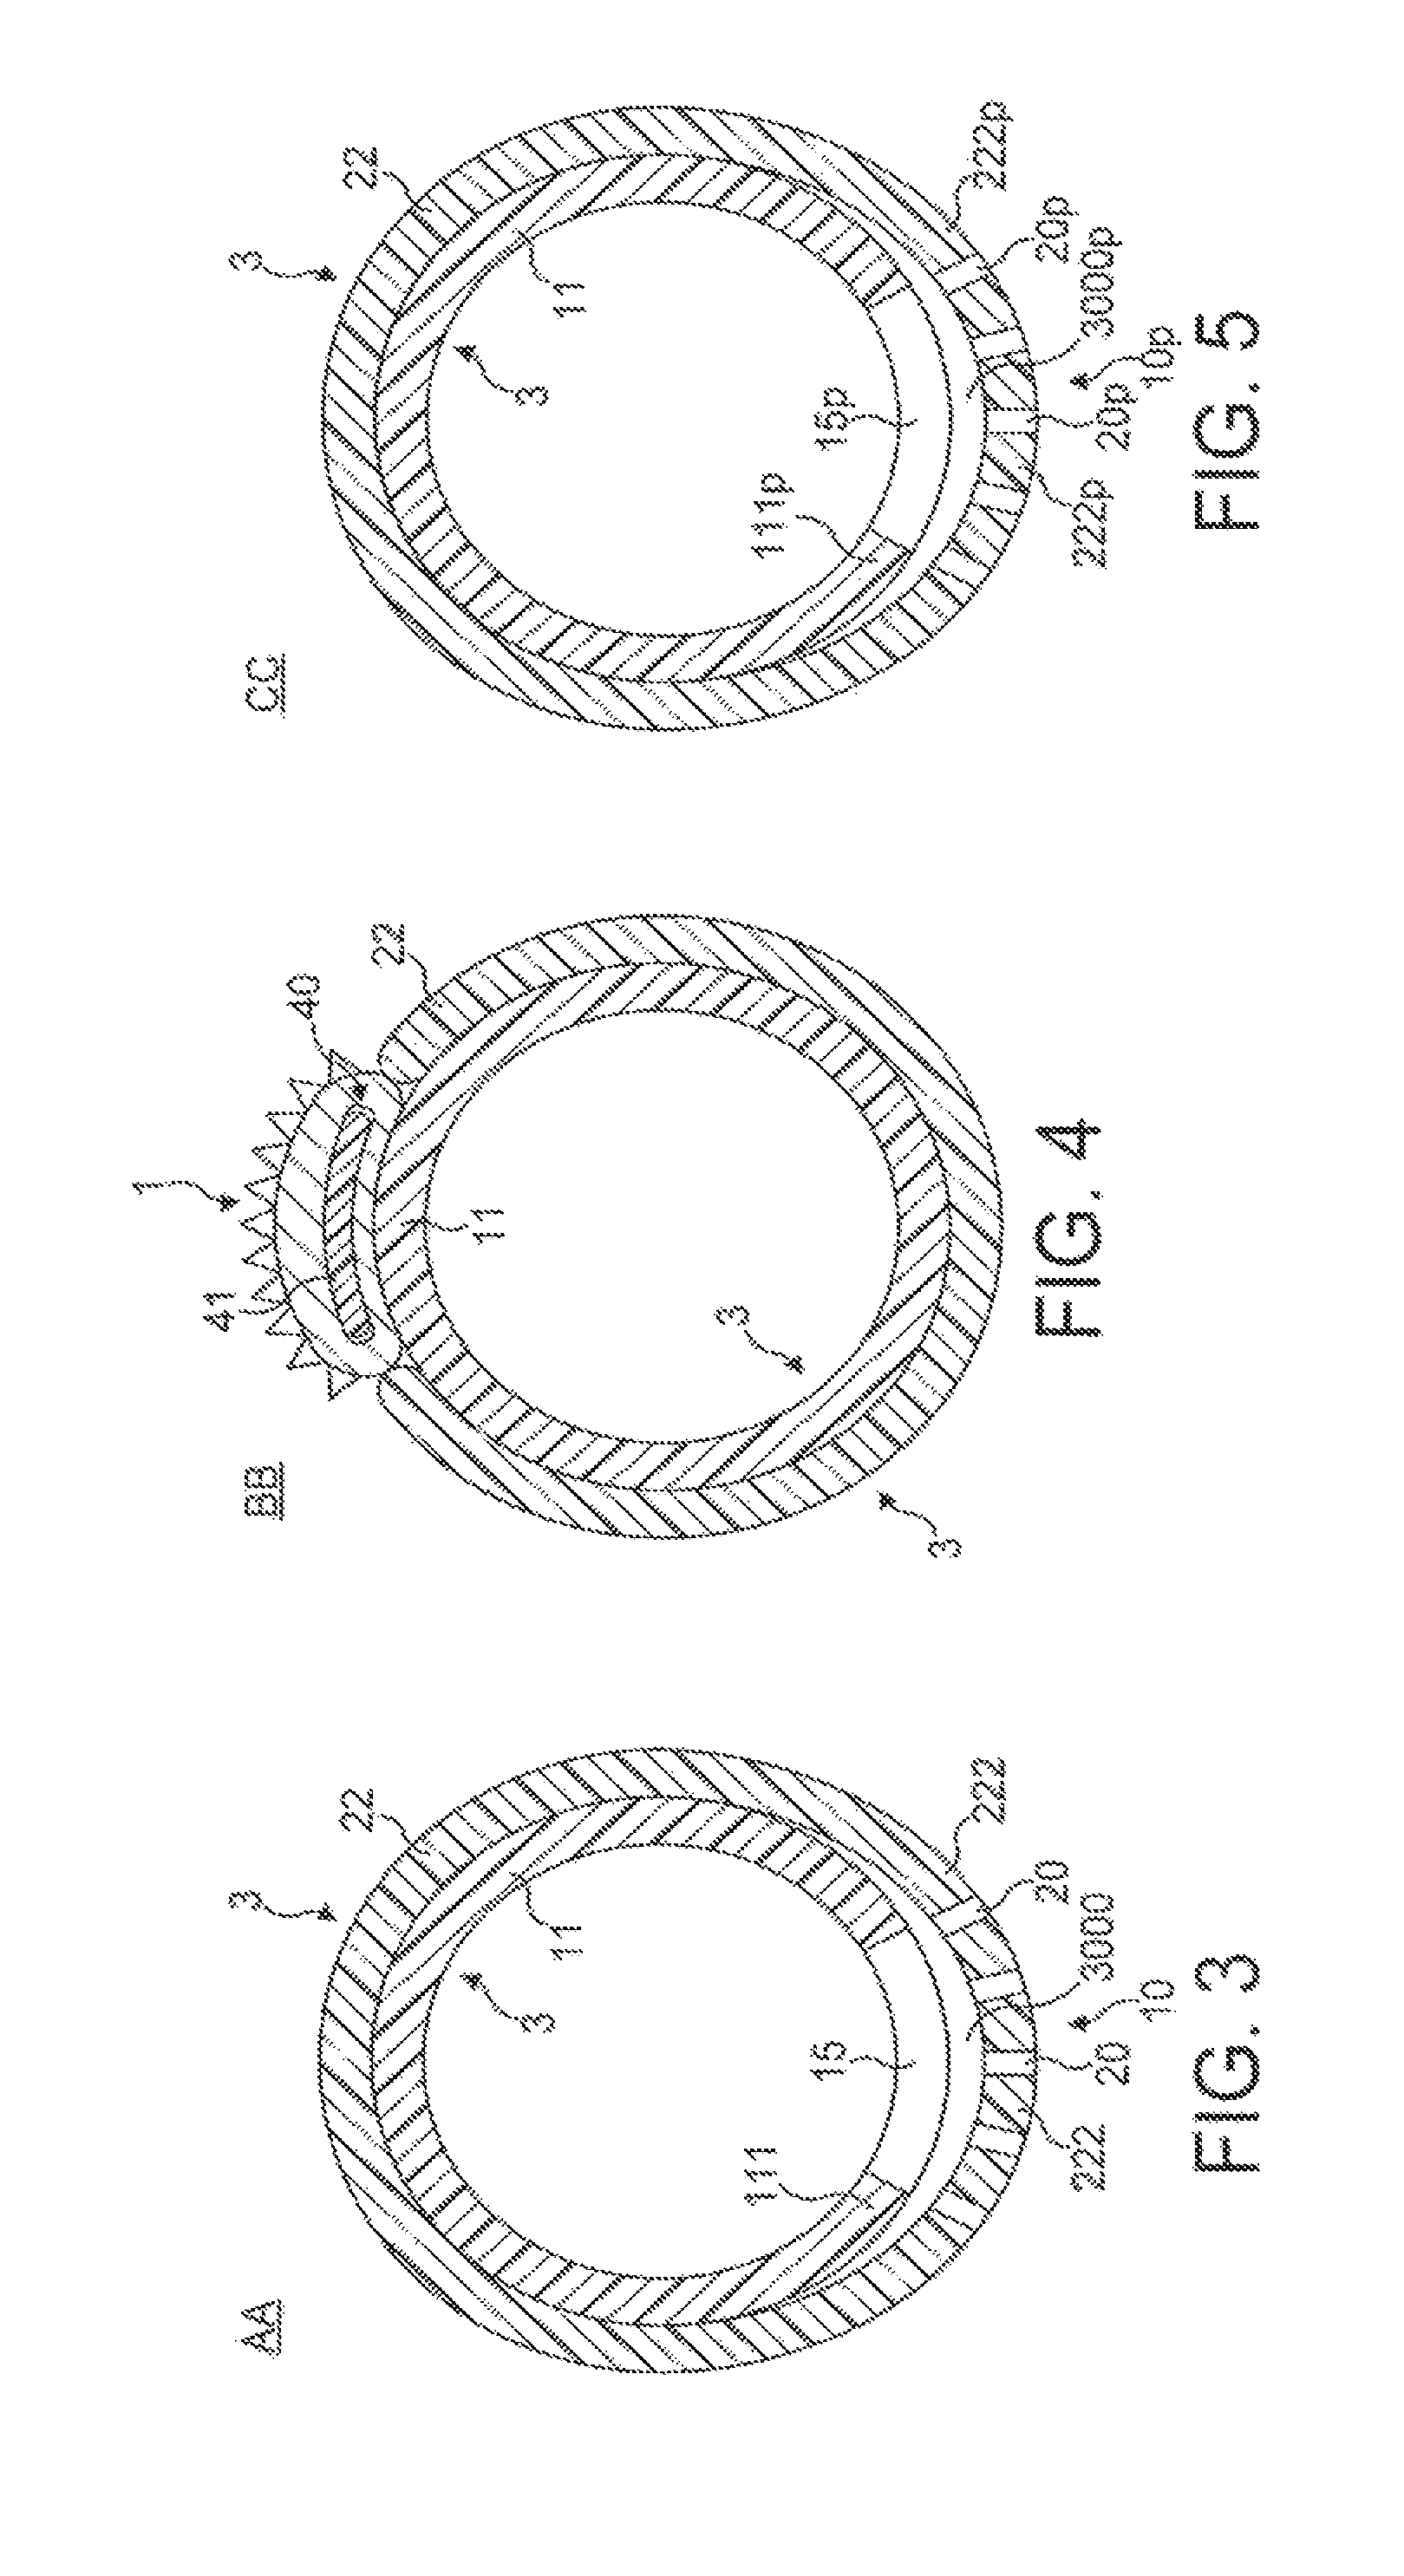 Rotational device with inflatable support elements and torque transmitting membrane